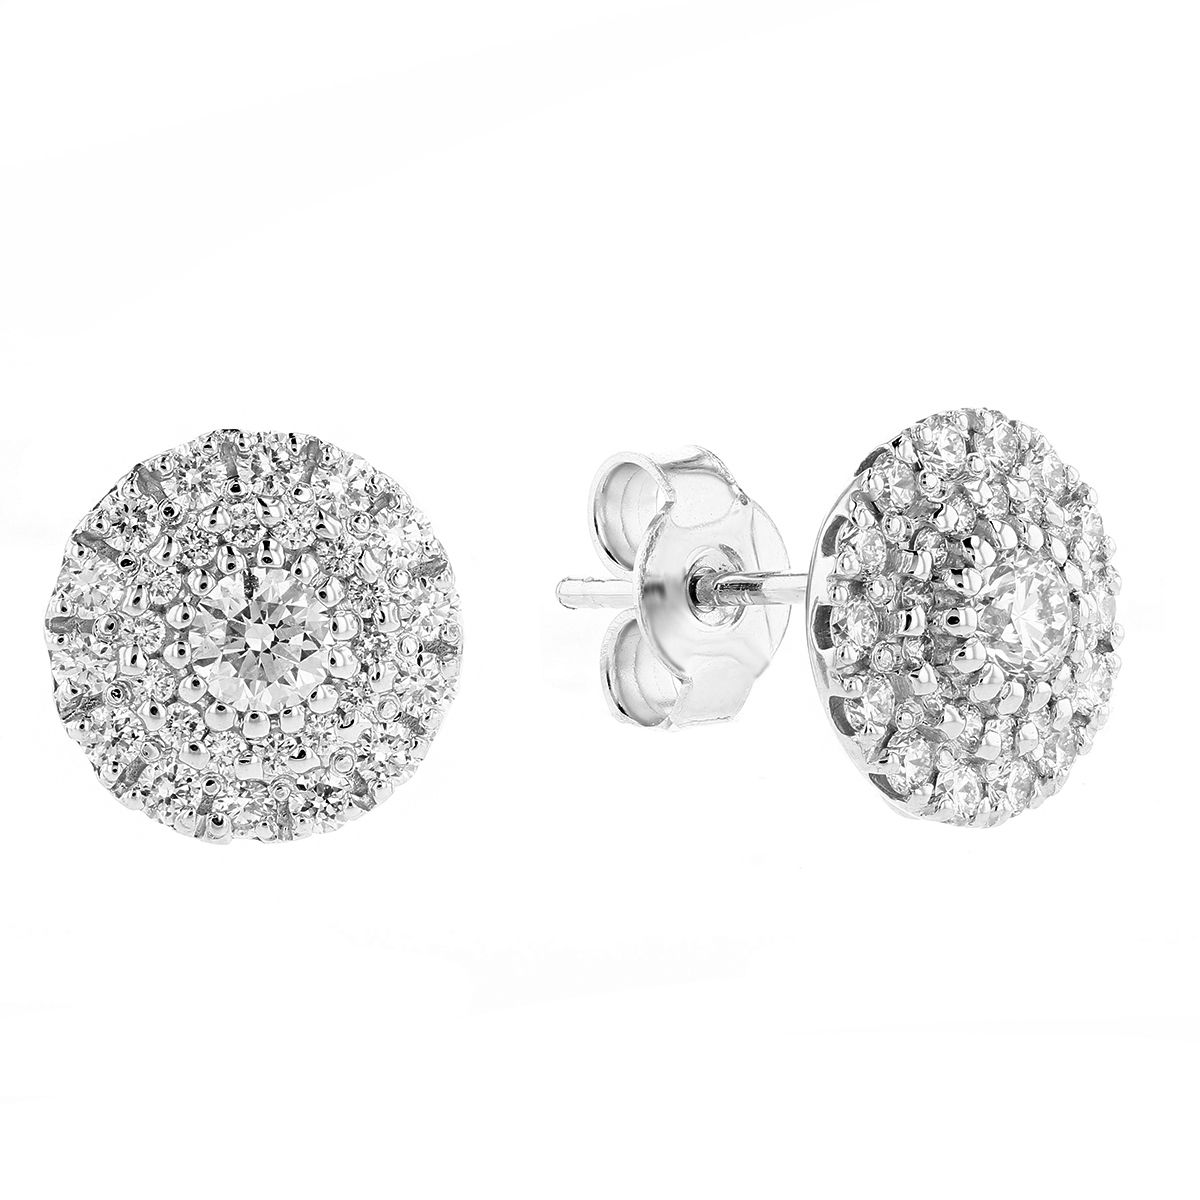 Roberto Coin Diamond Cluster Earrings in White Gold | 001085AWERX0 ...